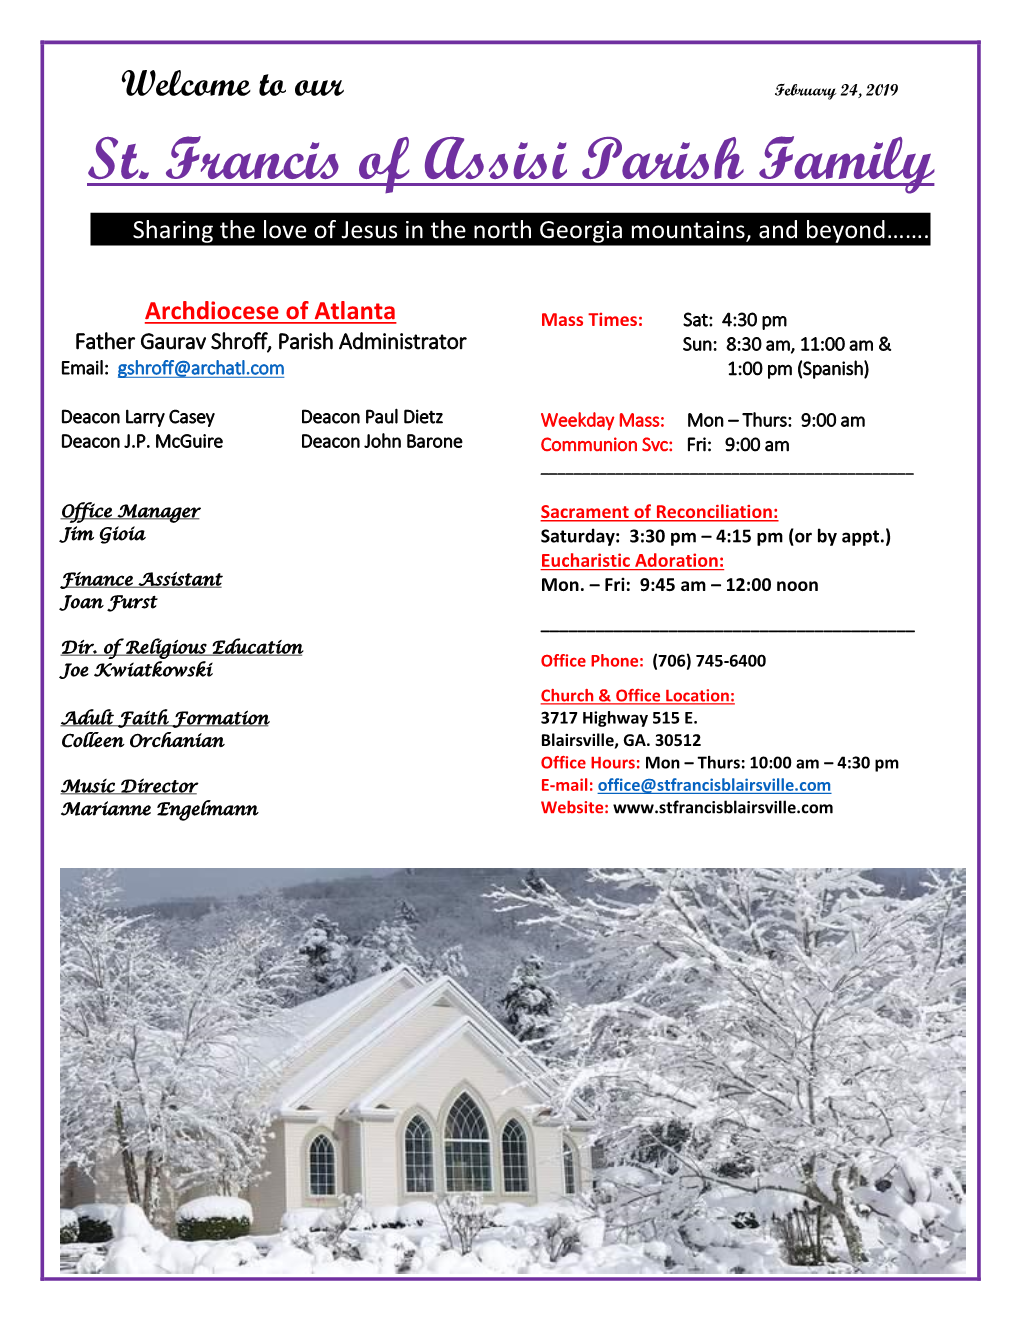 St. Francis of Assisi Parish Family Sharing the Love of Jesus in the North Georgia Mountains, and Beyond……